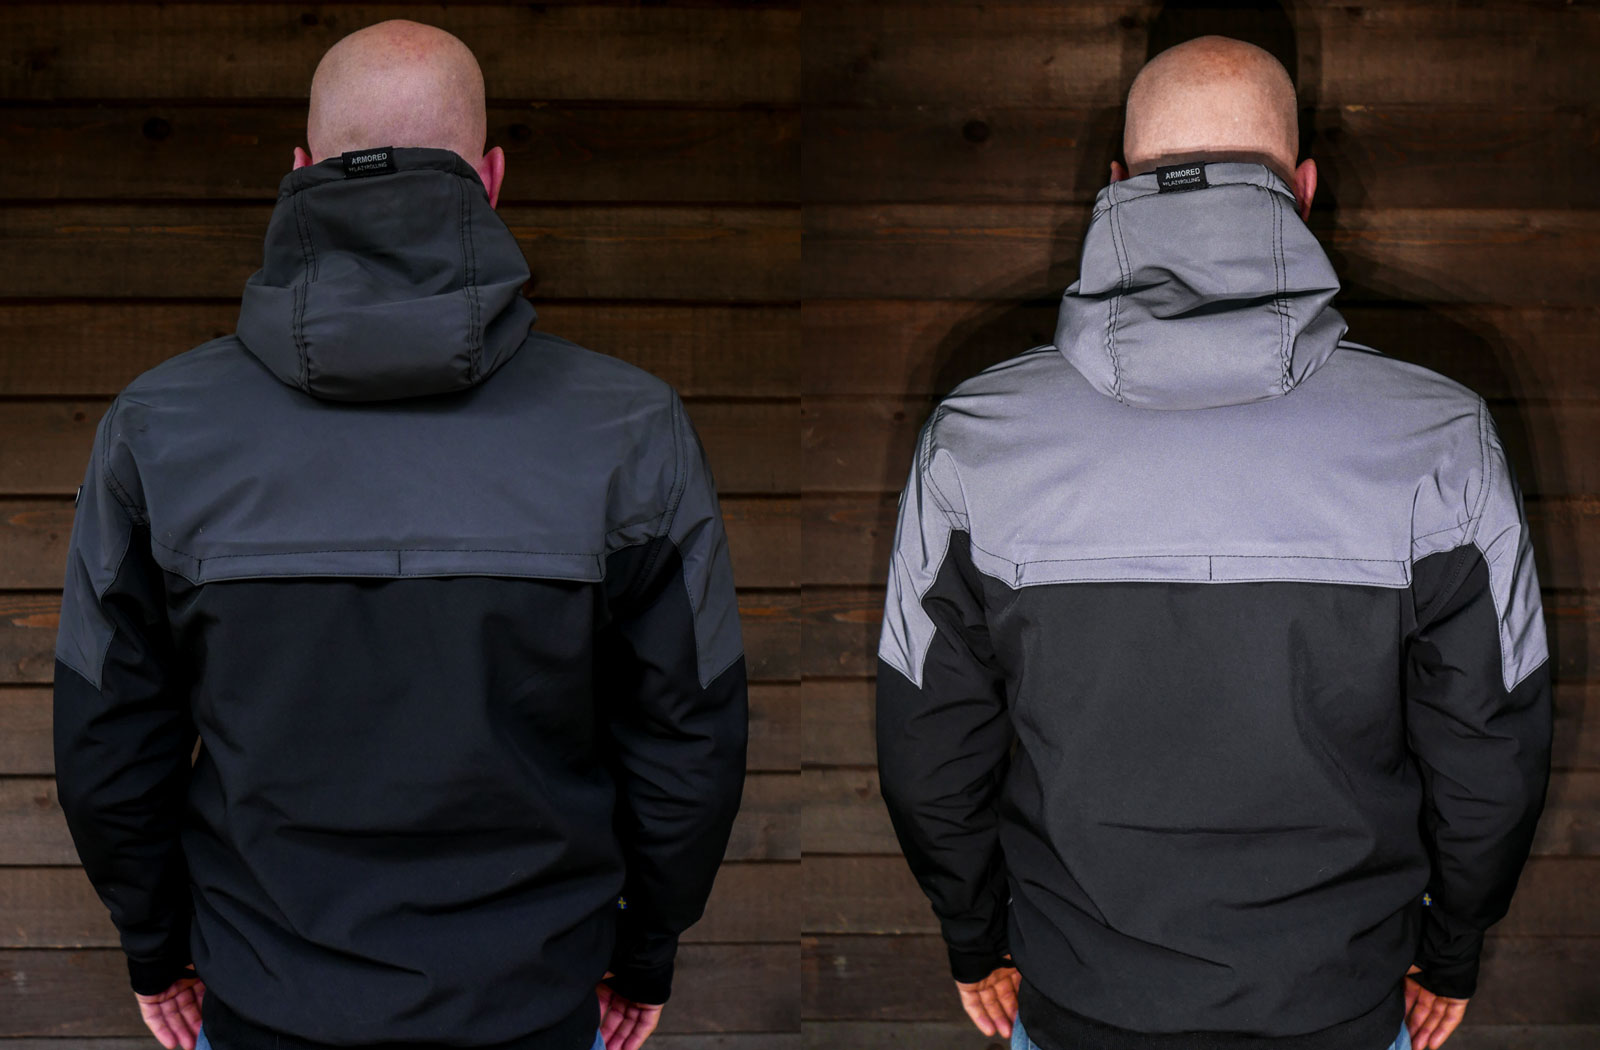 Lazyrolling Armored Reflective Jacket Review